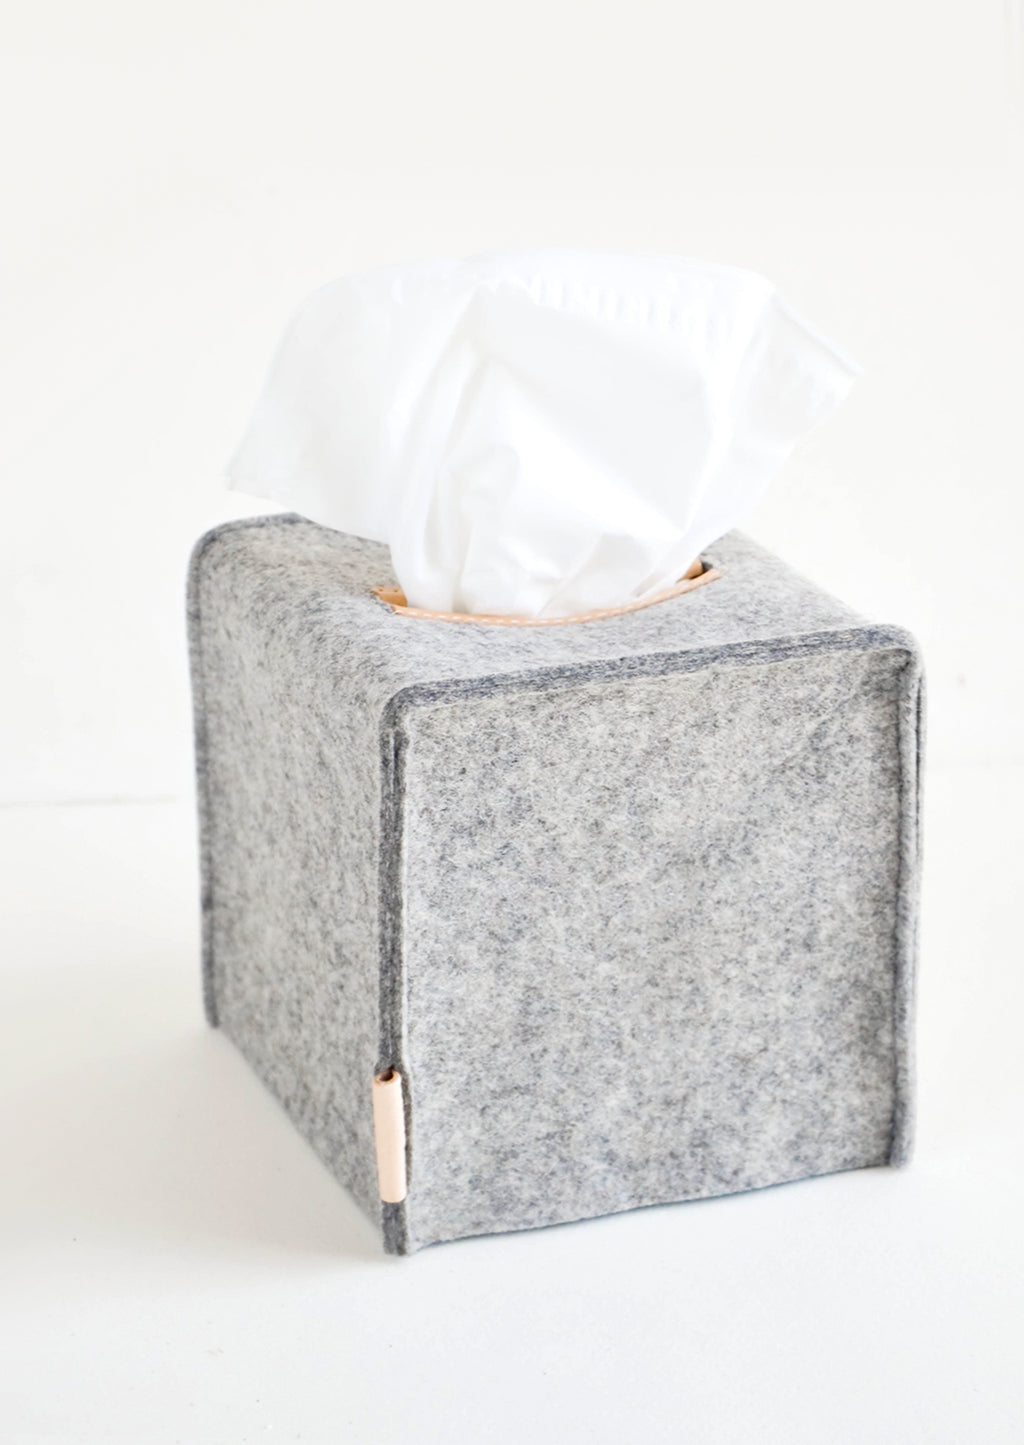 Cube / Granite: Cube-shaped tissue box cover made from felted wool in heathered dark grey color with leather accents